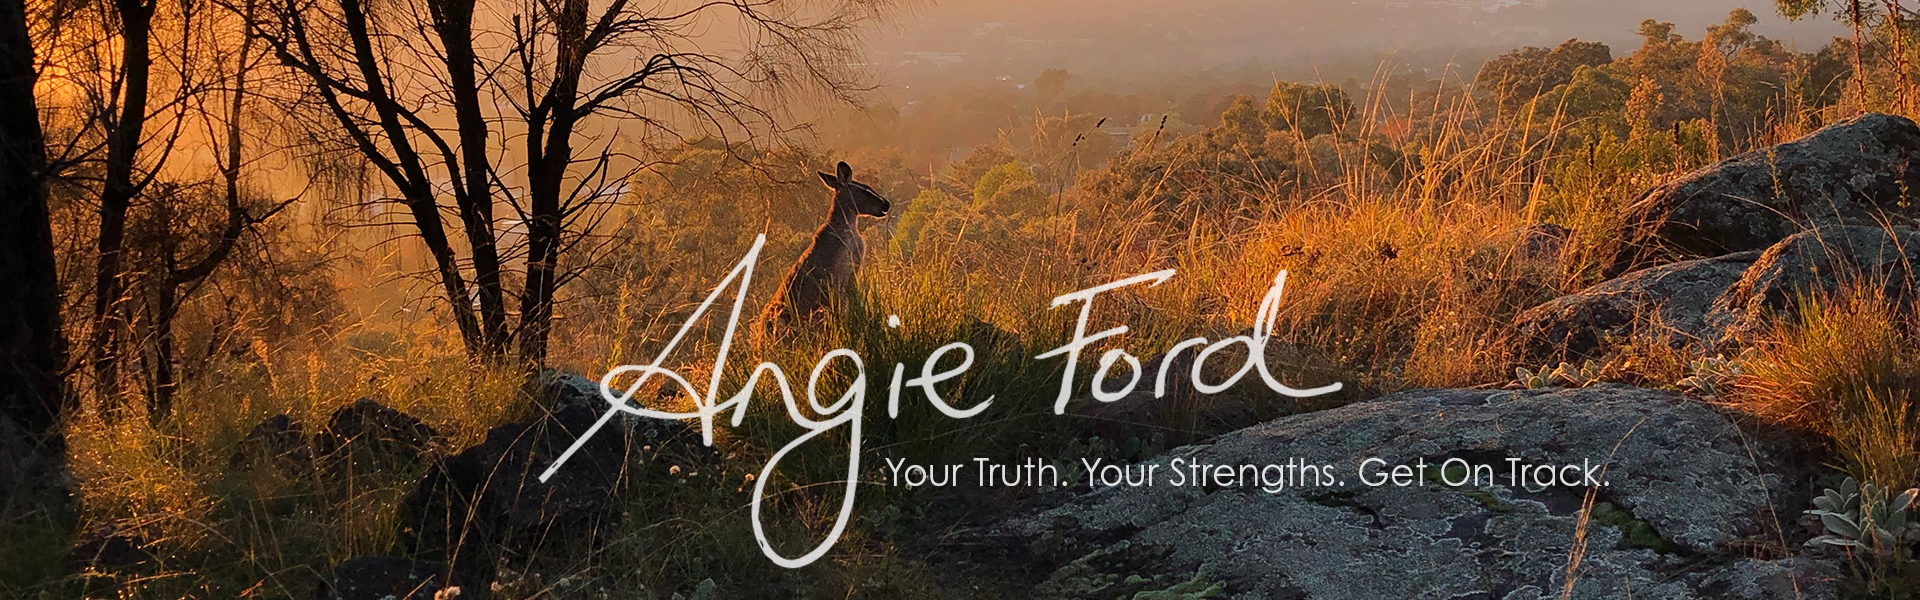 Angie-Ford_Leadership-Philosophy_Going-First_1920x600px_DR